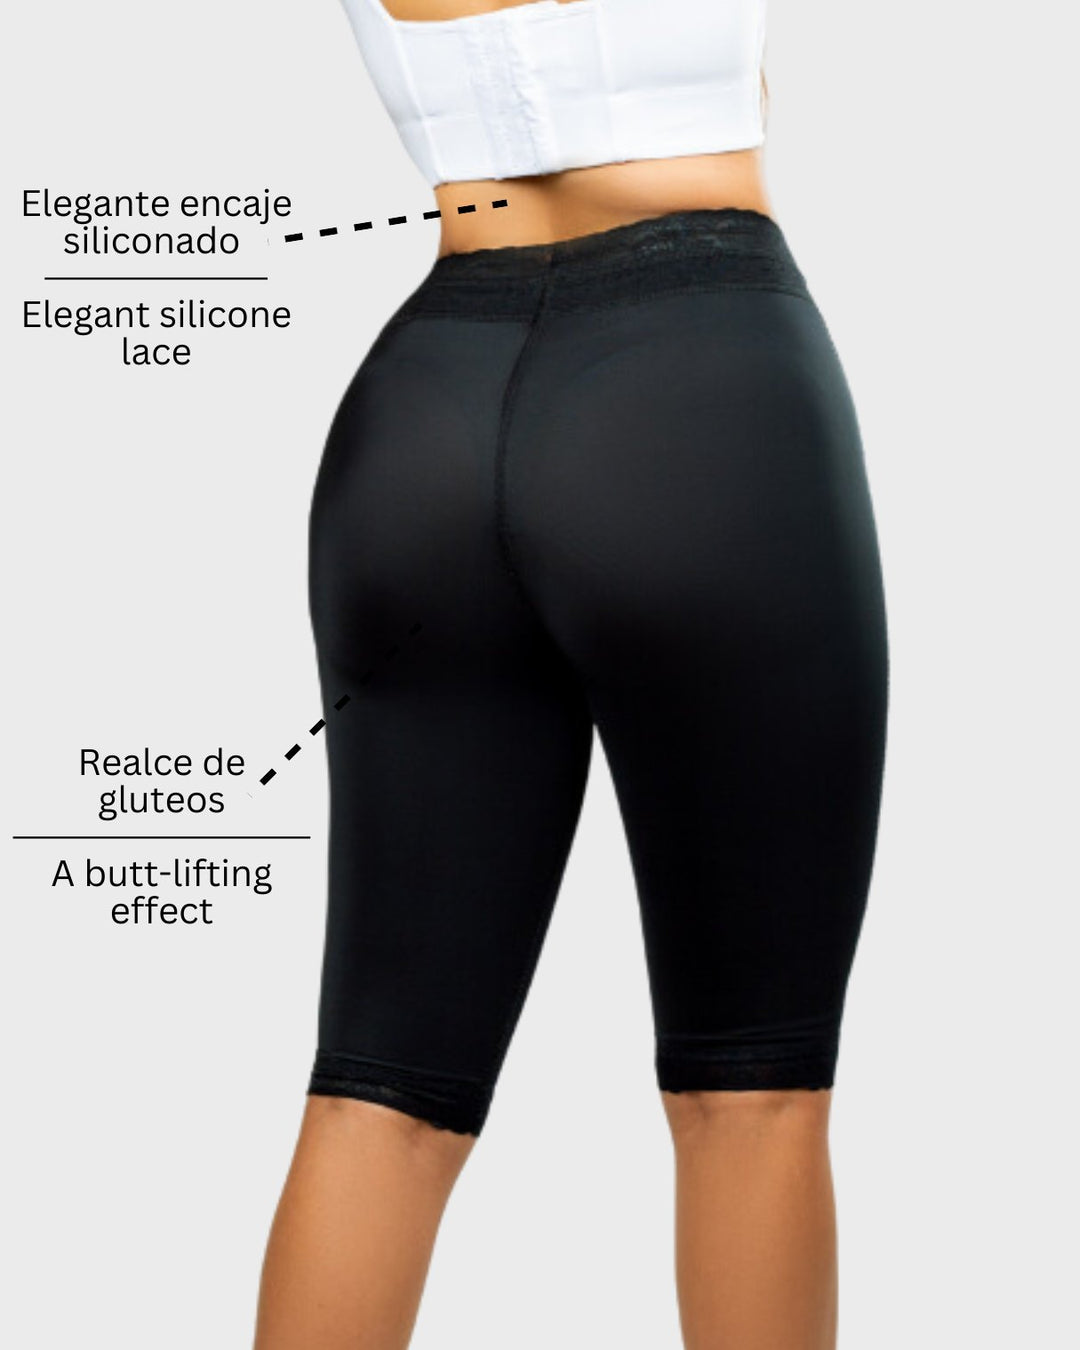 What Effect Do Colombian Girdles Have? The Secret of its